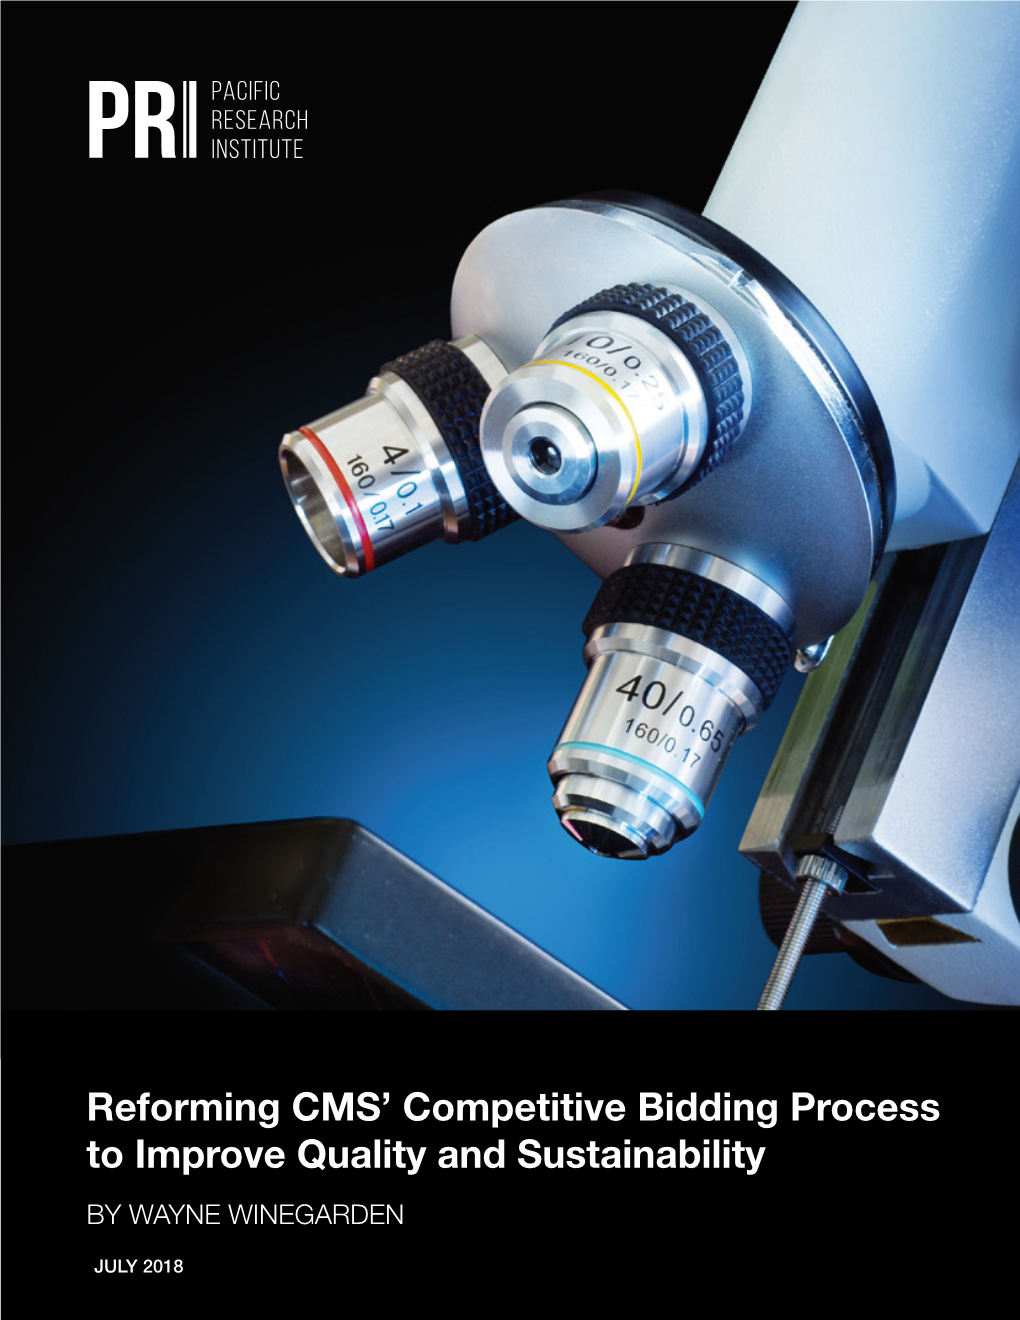 Reforming CMS' Competitive Bidding Process to Improve Quality and Sustainability